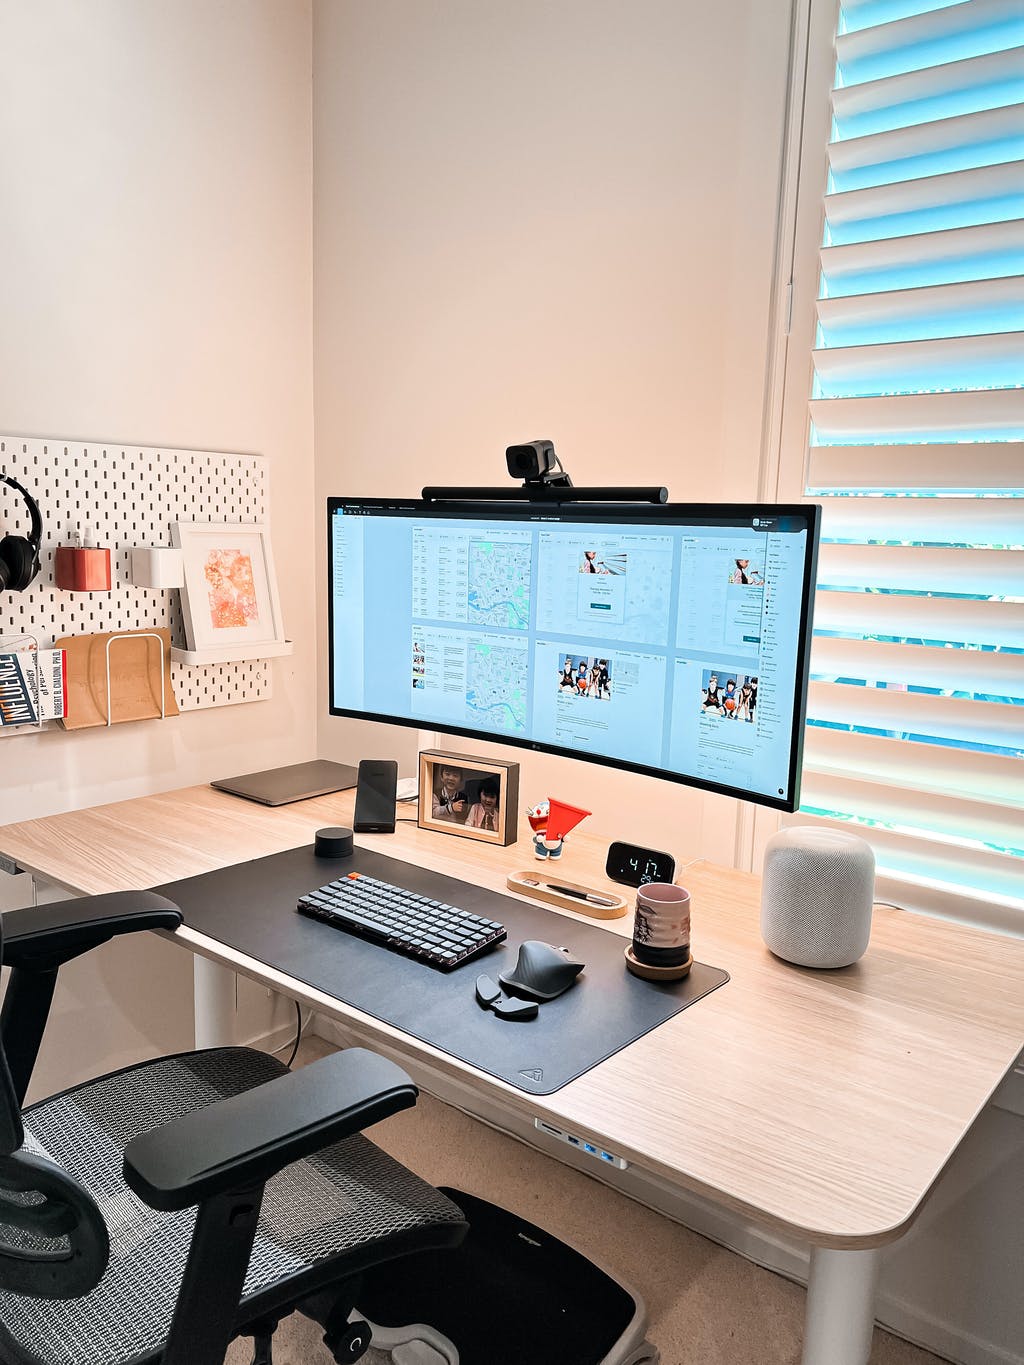 5 Reasons Why You Need a Desk Pad